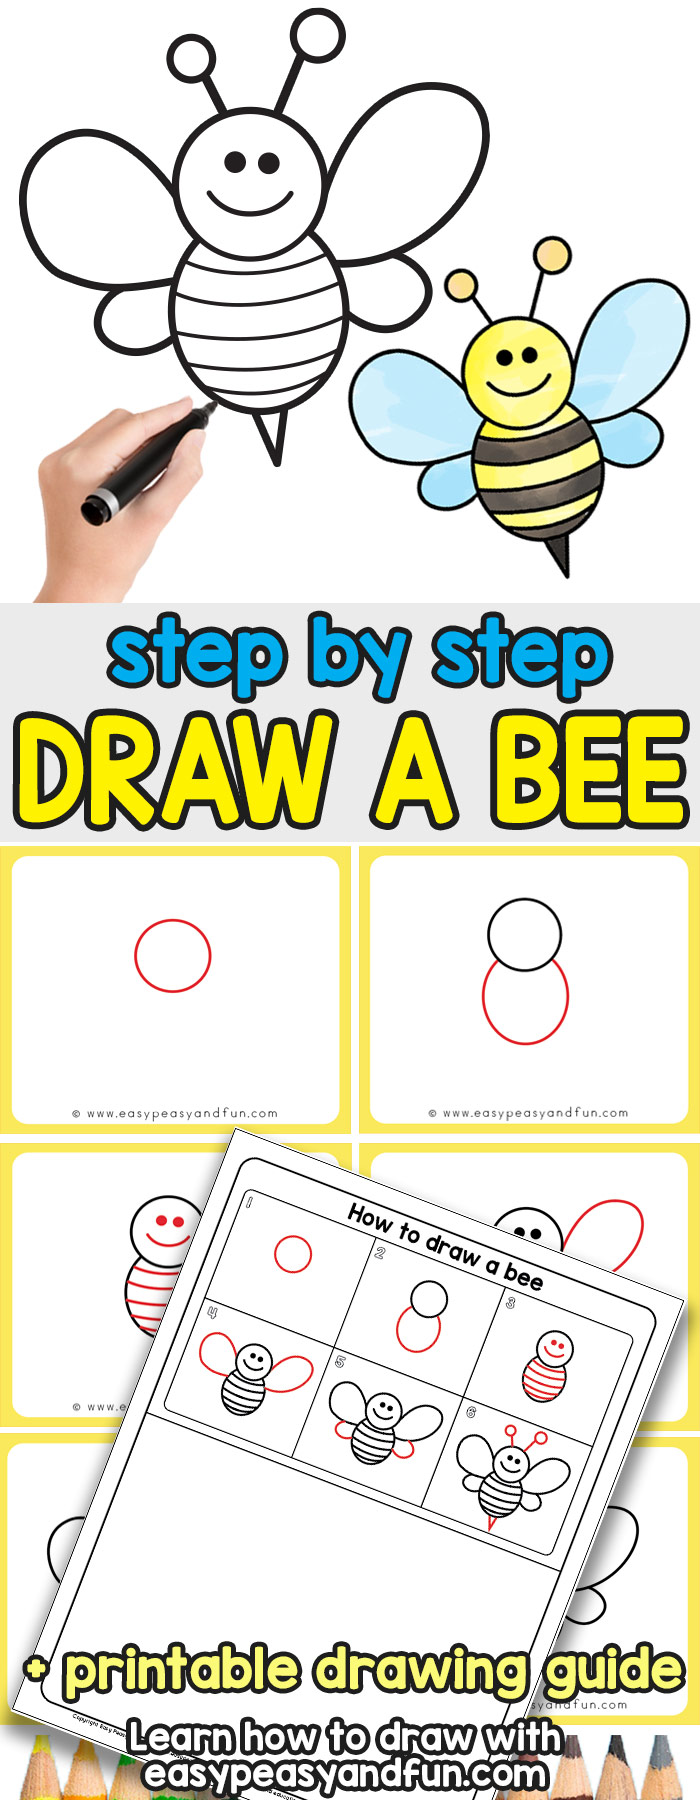 How to Draw a Bee - Easy step by step drawing tutorial for kids and beginners